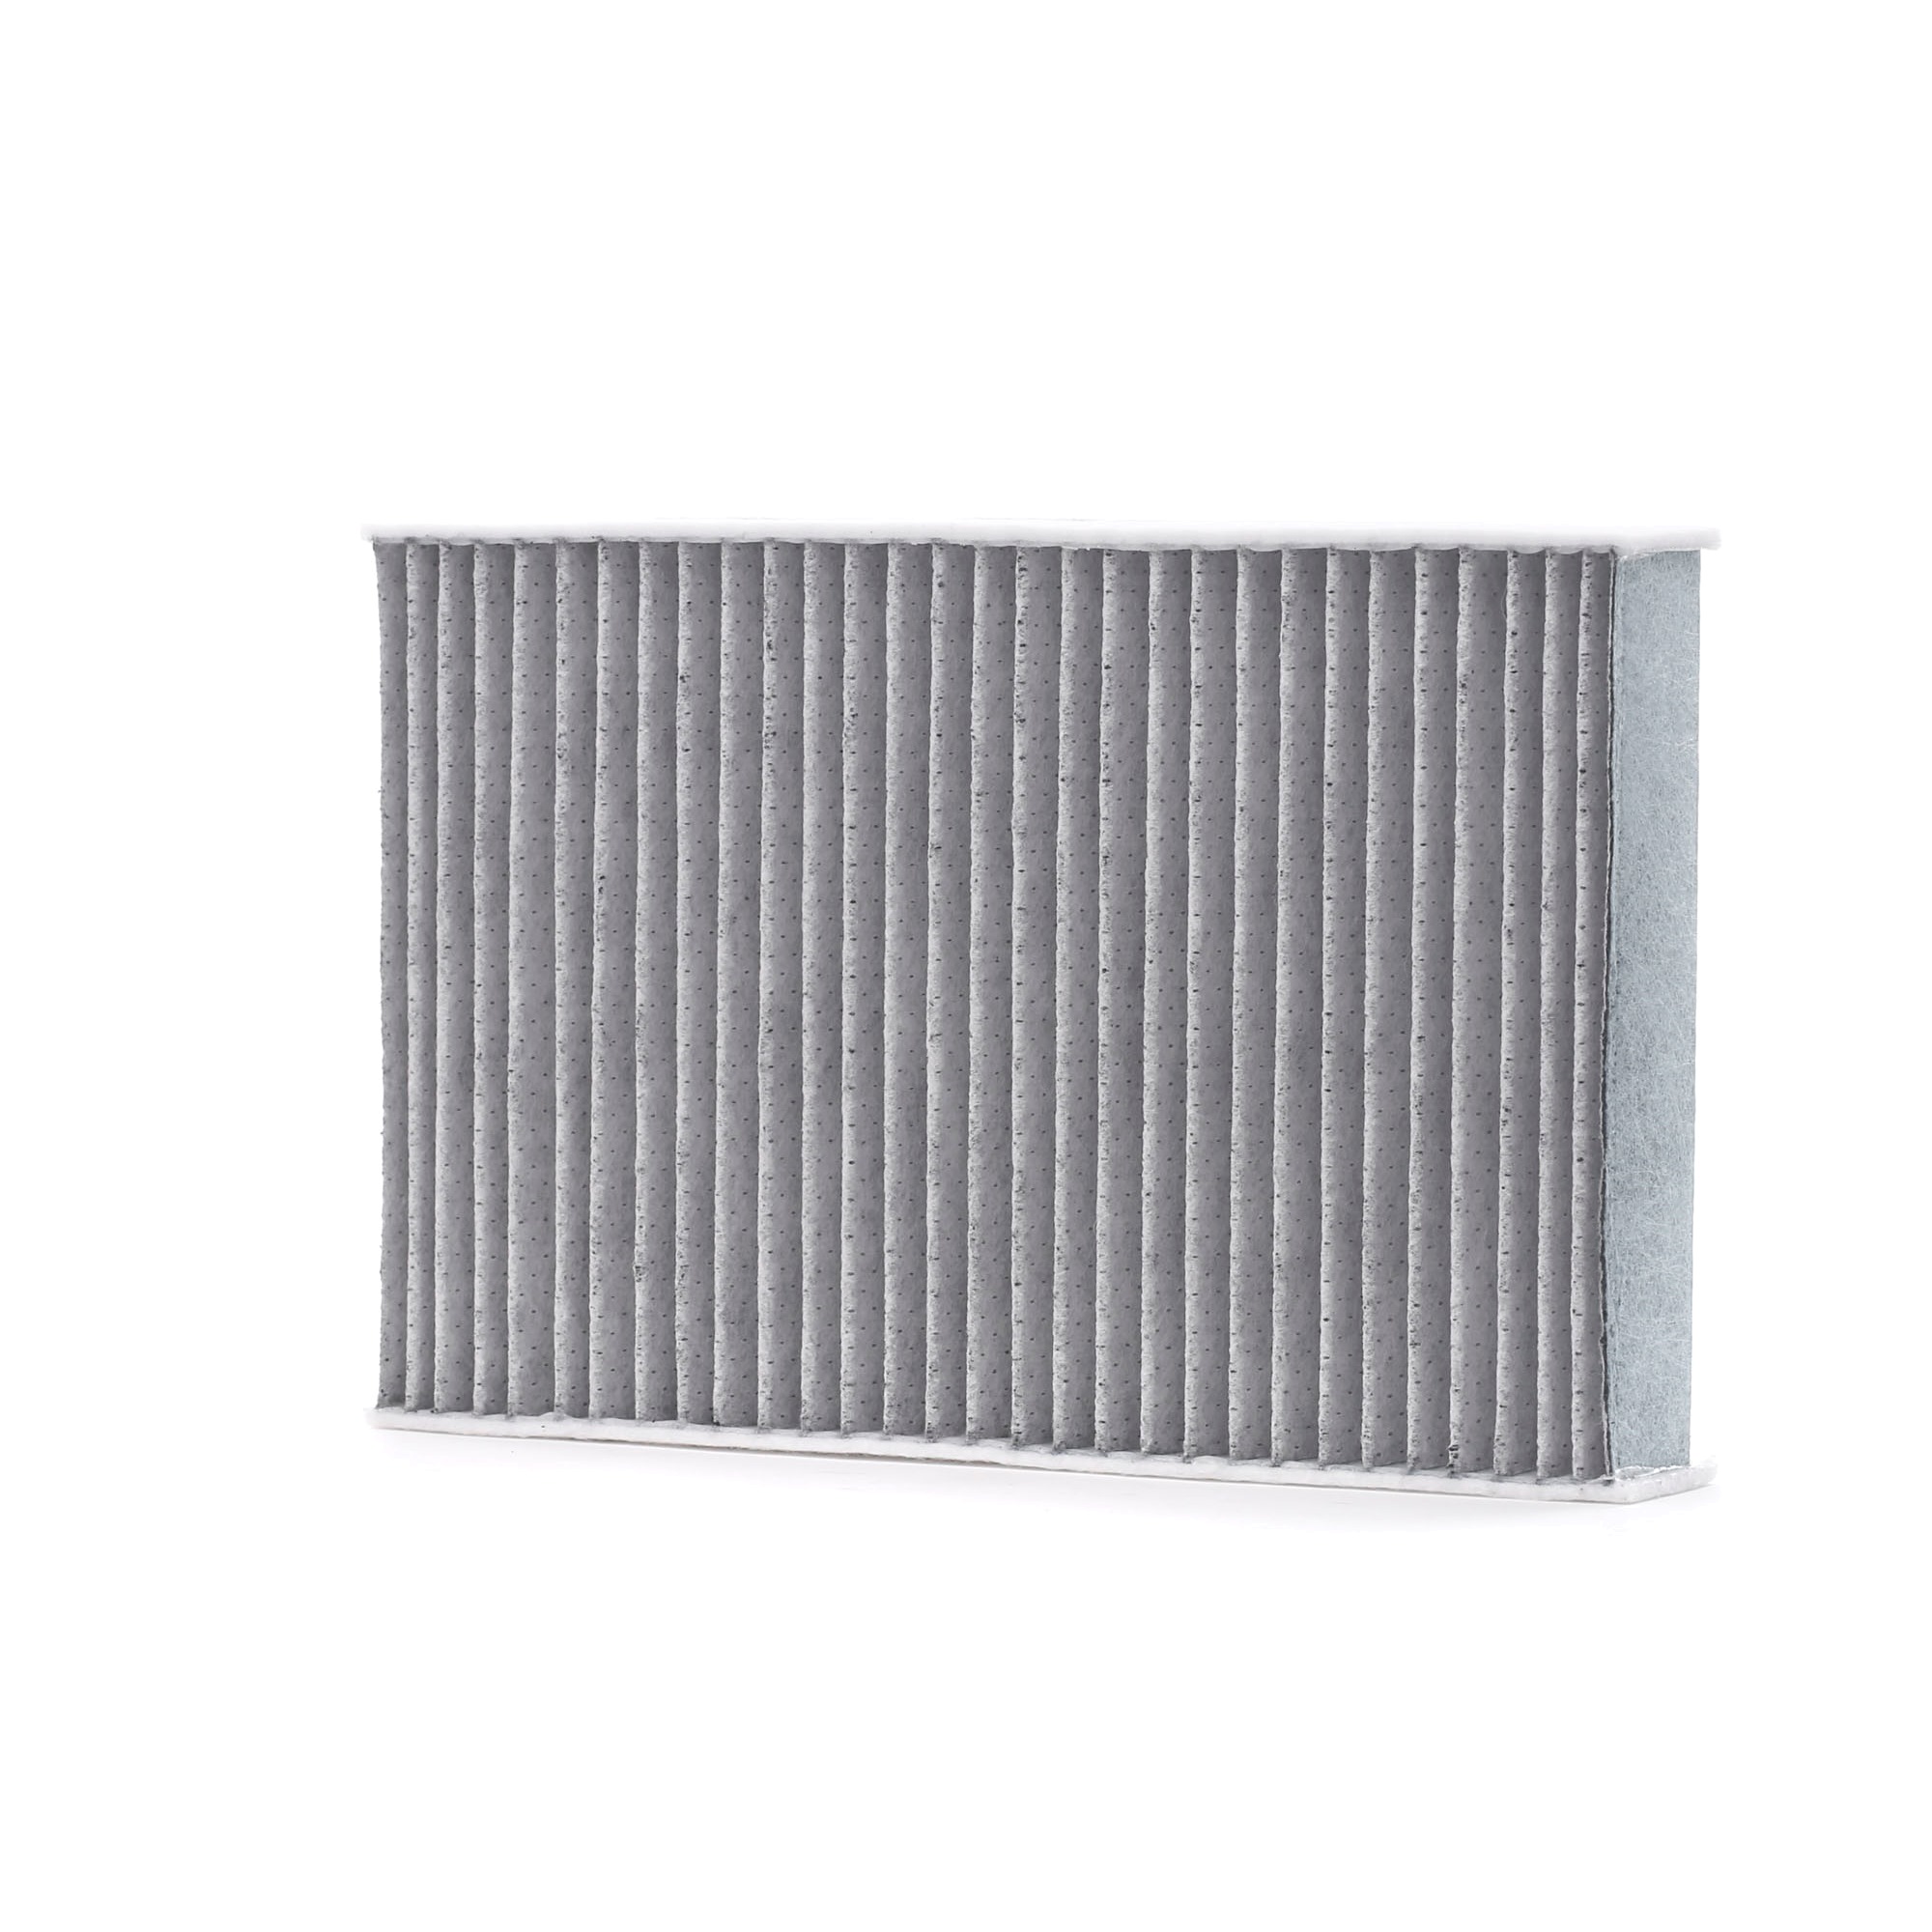 A 8550 BOSCH Activated Carbon Filter, 236 mm x 152 mm x 32 mm, FILTER+ Width: 152mm, Height: 32mm, Length: 236mm Cabin filter 0 986 628 550 buy